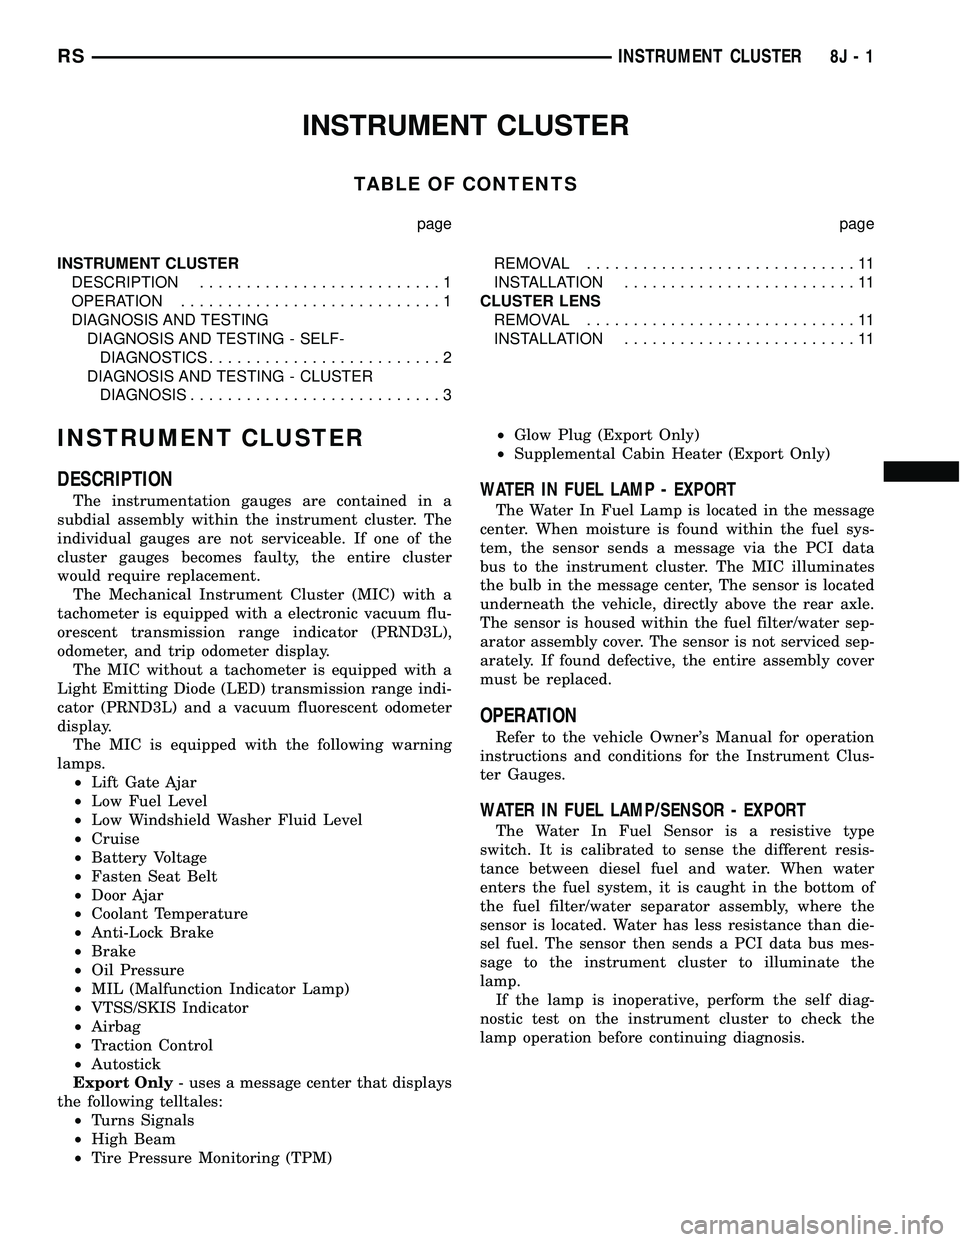 CHRYSLER CARAVAN 2005  Service Manual INSTRUMENT CLUSTER
TABLE OF CONTENTS
page page
INSTRUMENT CLUSTER
DESCRIPTION..........................1
OPERATION............................1
DIAGNOSIS AND TESTING
DIAGNOSIS AND TESTING - SELF-
DIAG